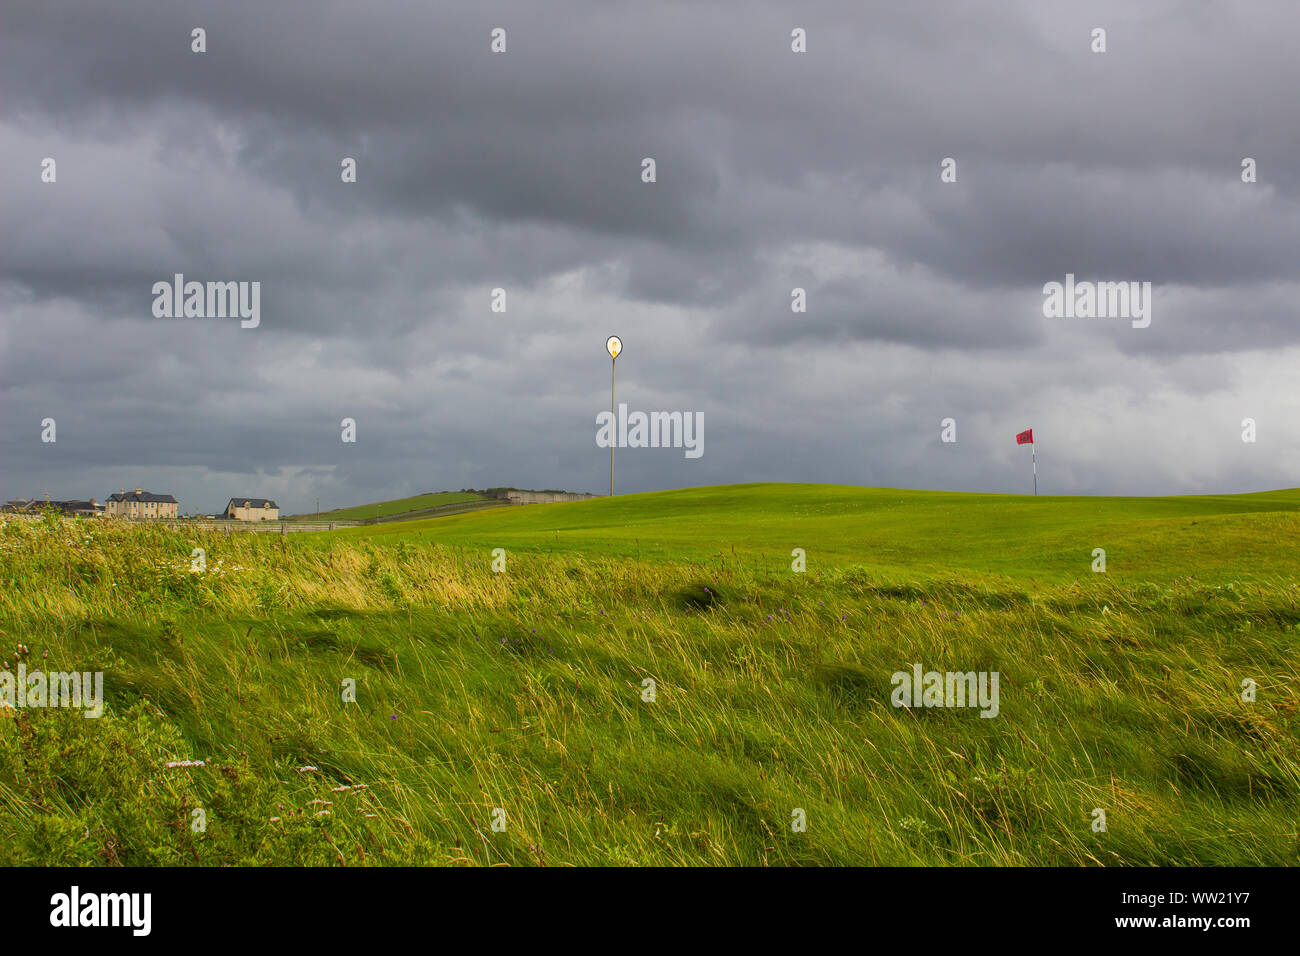 22 Augusrt 2019 The 8th hole and on Bundoran Golf Course  in County Donegal Ireland on a damp day with dark ominous storm clouds overhead. Stock Photo